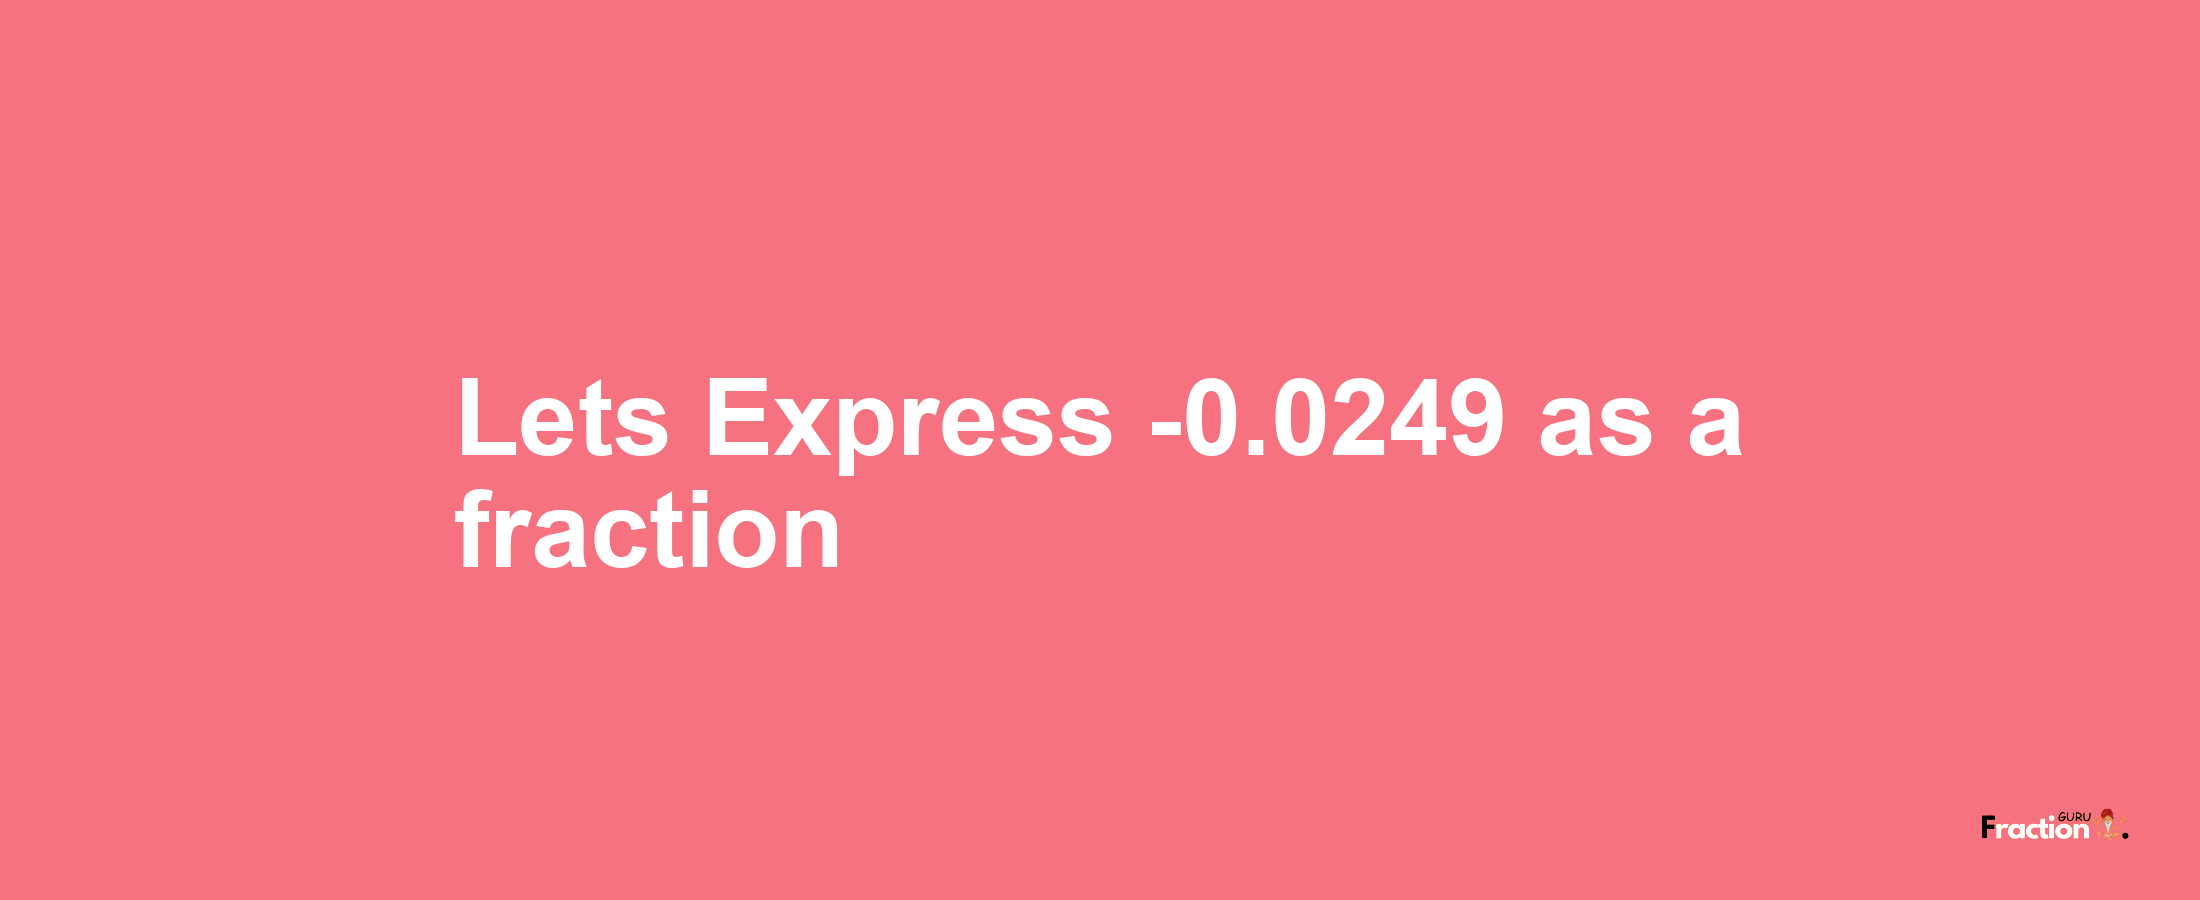 Lets Express -0.0249 as afraction